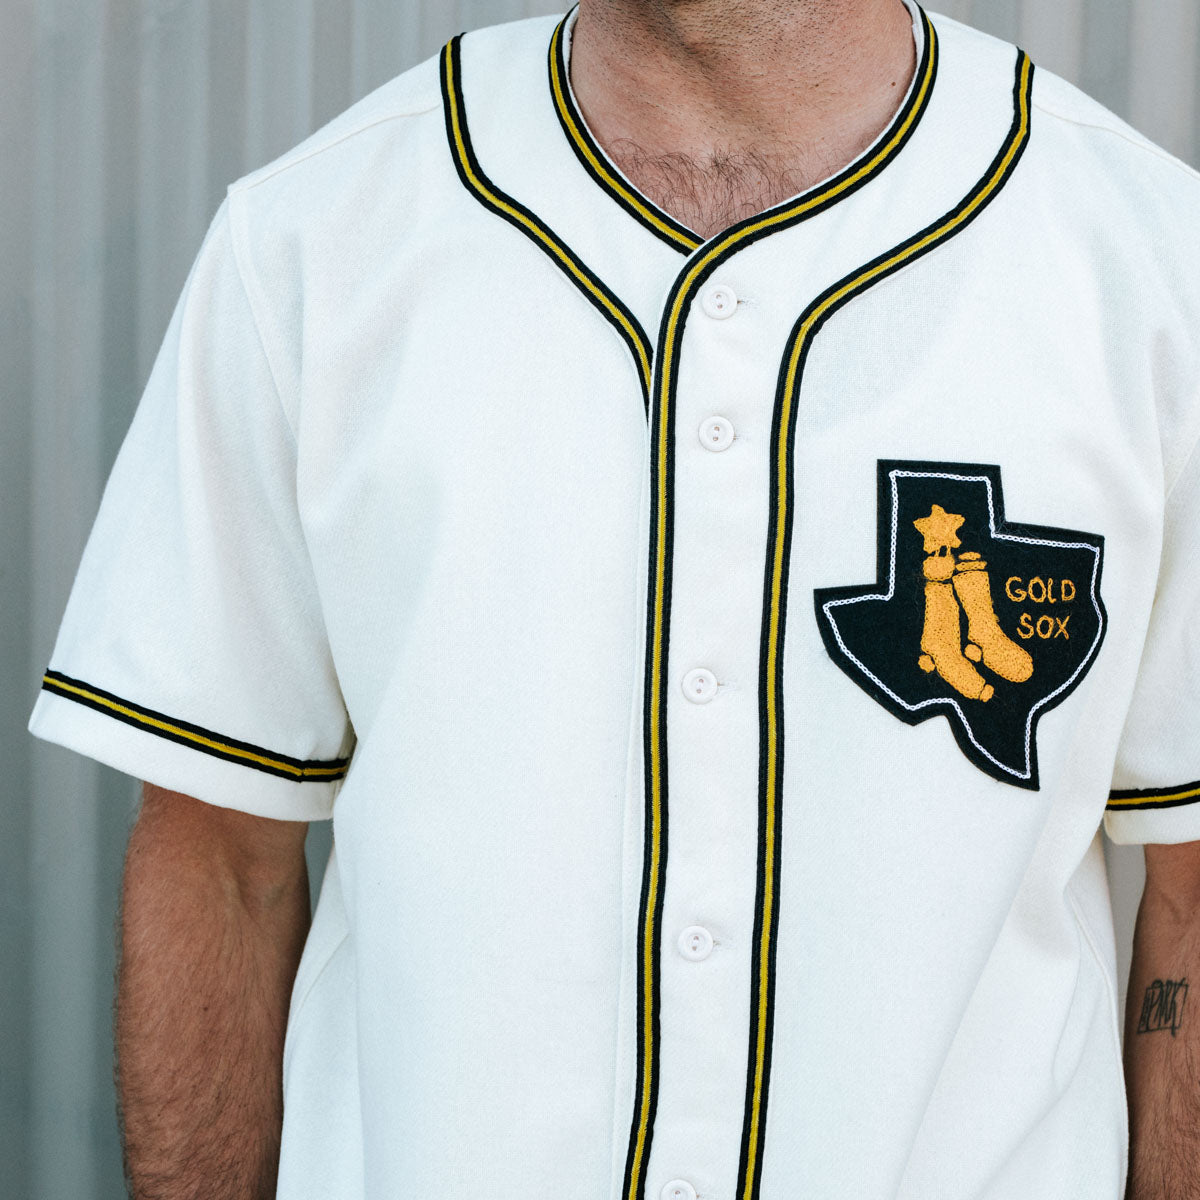 Ebbets Field Flannels Amarillo Gold Sox 1961 Home Jersey